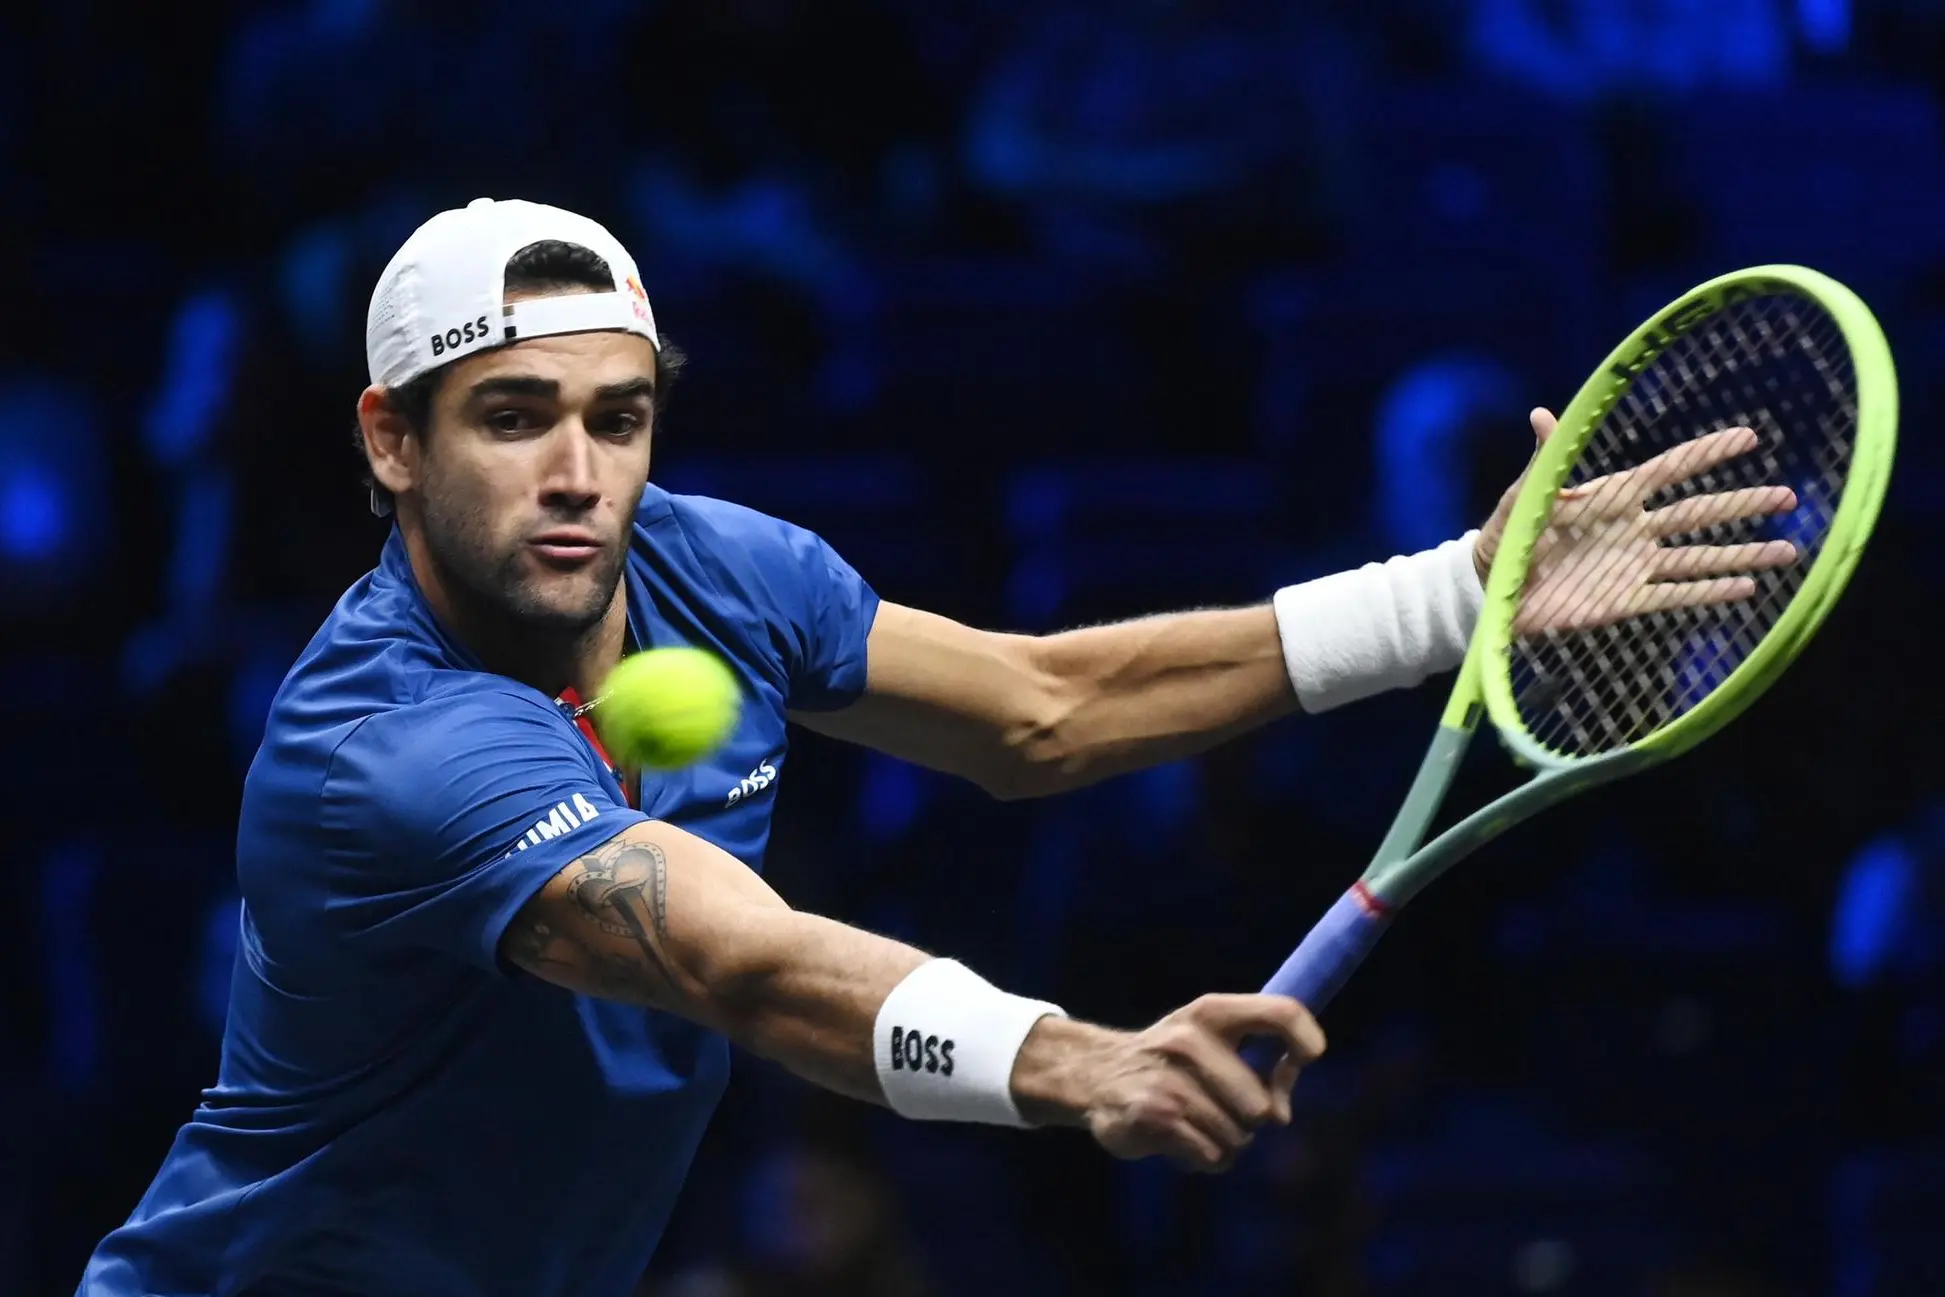 epa10203498 Matteo Berrettini of Team Europe in action against Felix Auger-Aliassime of Team World during a Laver Cup tennis match at the O2 Arena in London, Britain, 24 September 2022. EPA/ANDY RAIN